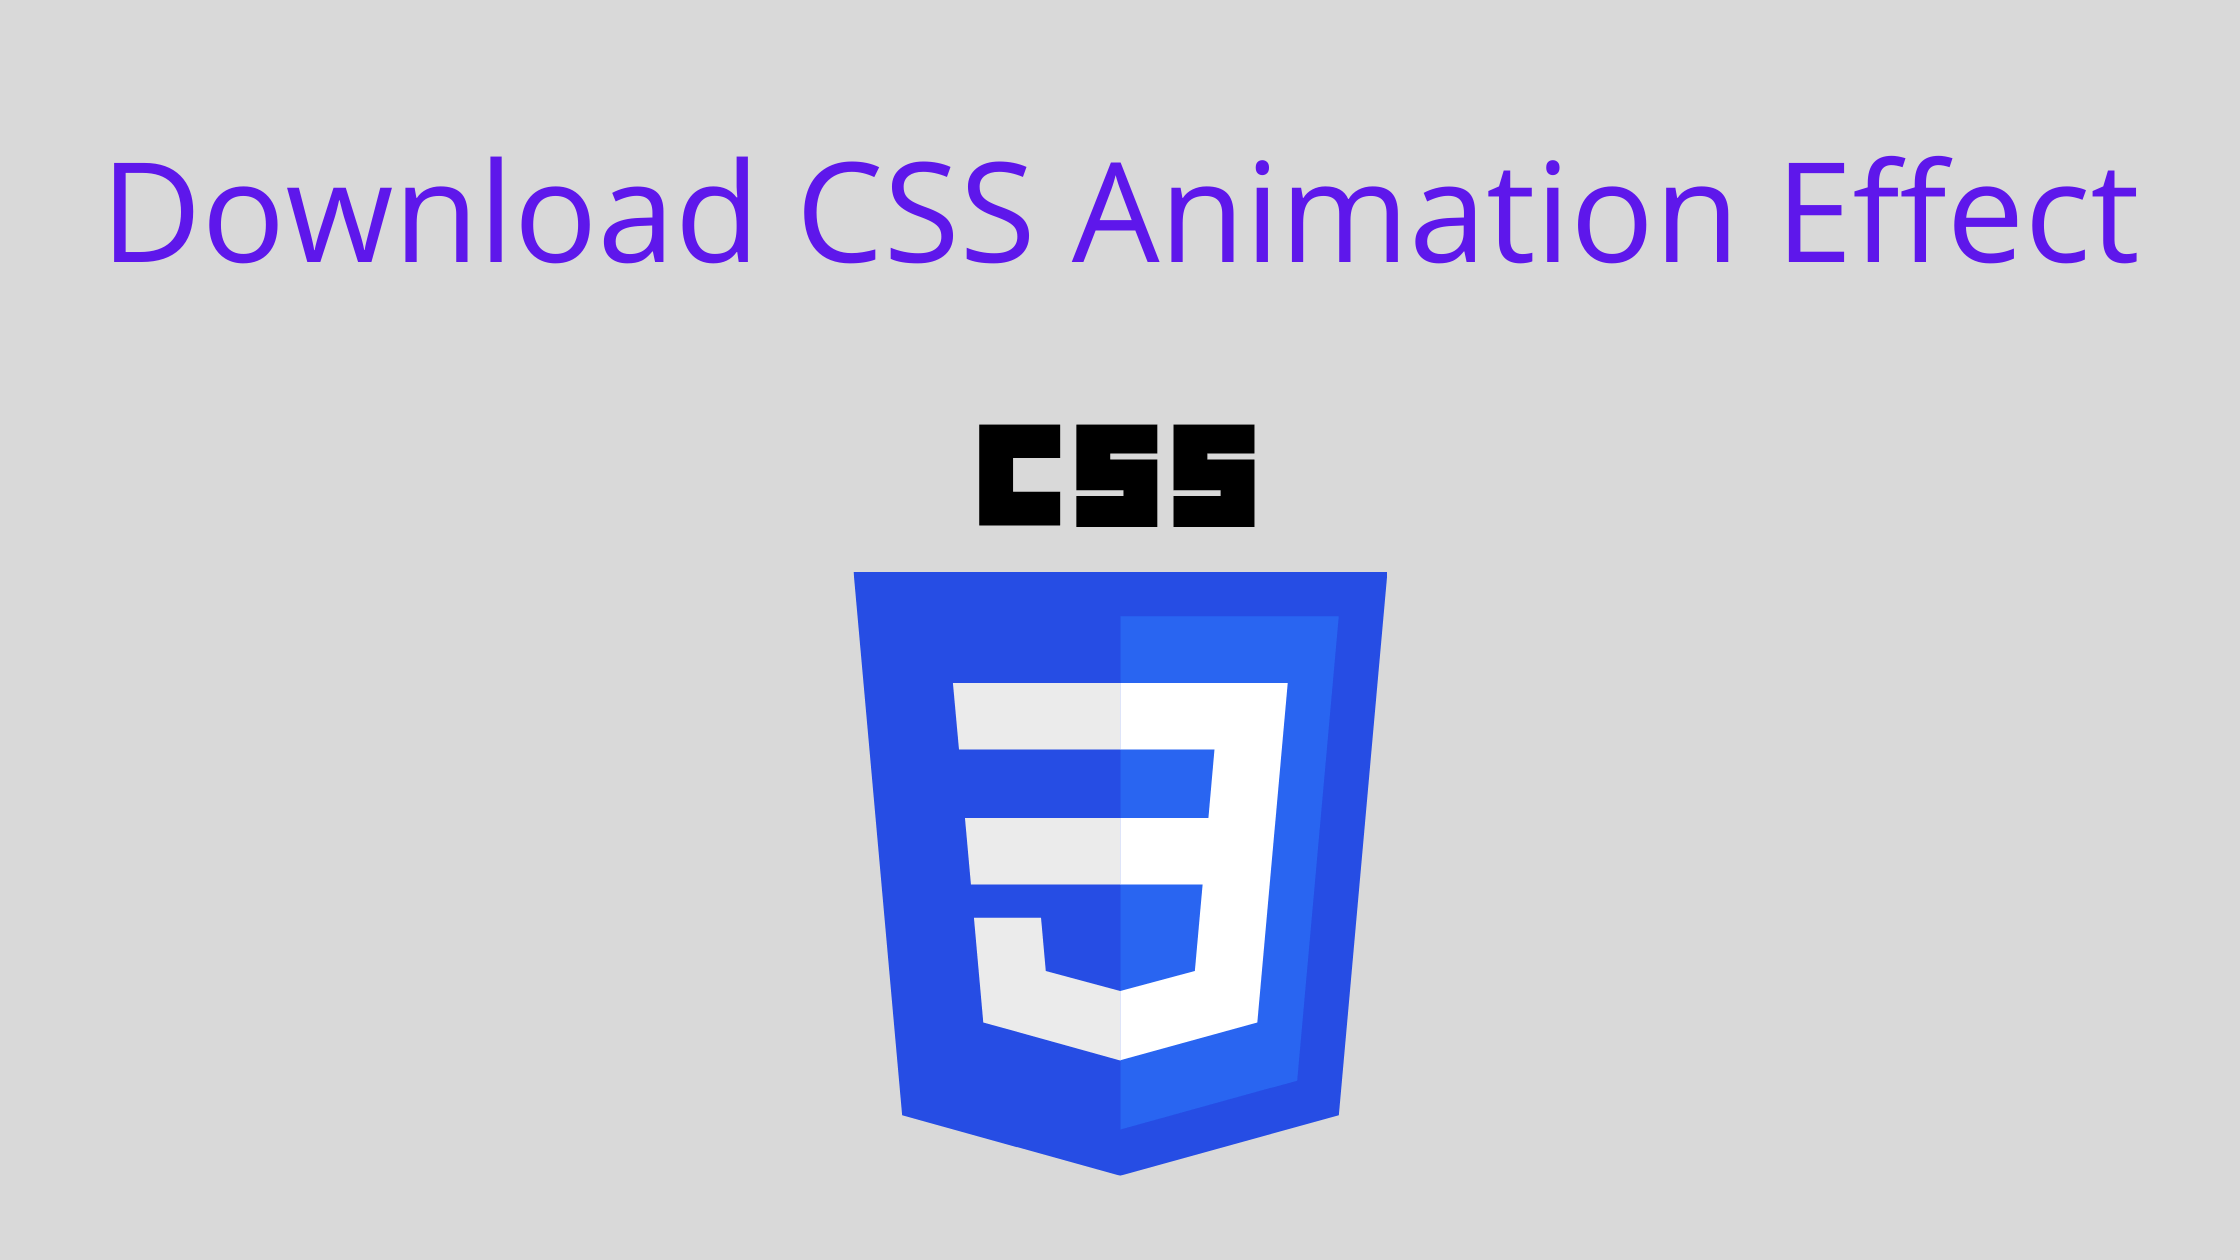 Top 10 Websites To Download CSS Animation Effect - Seeromega